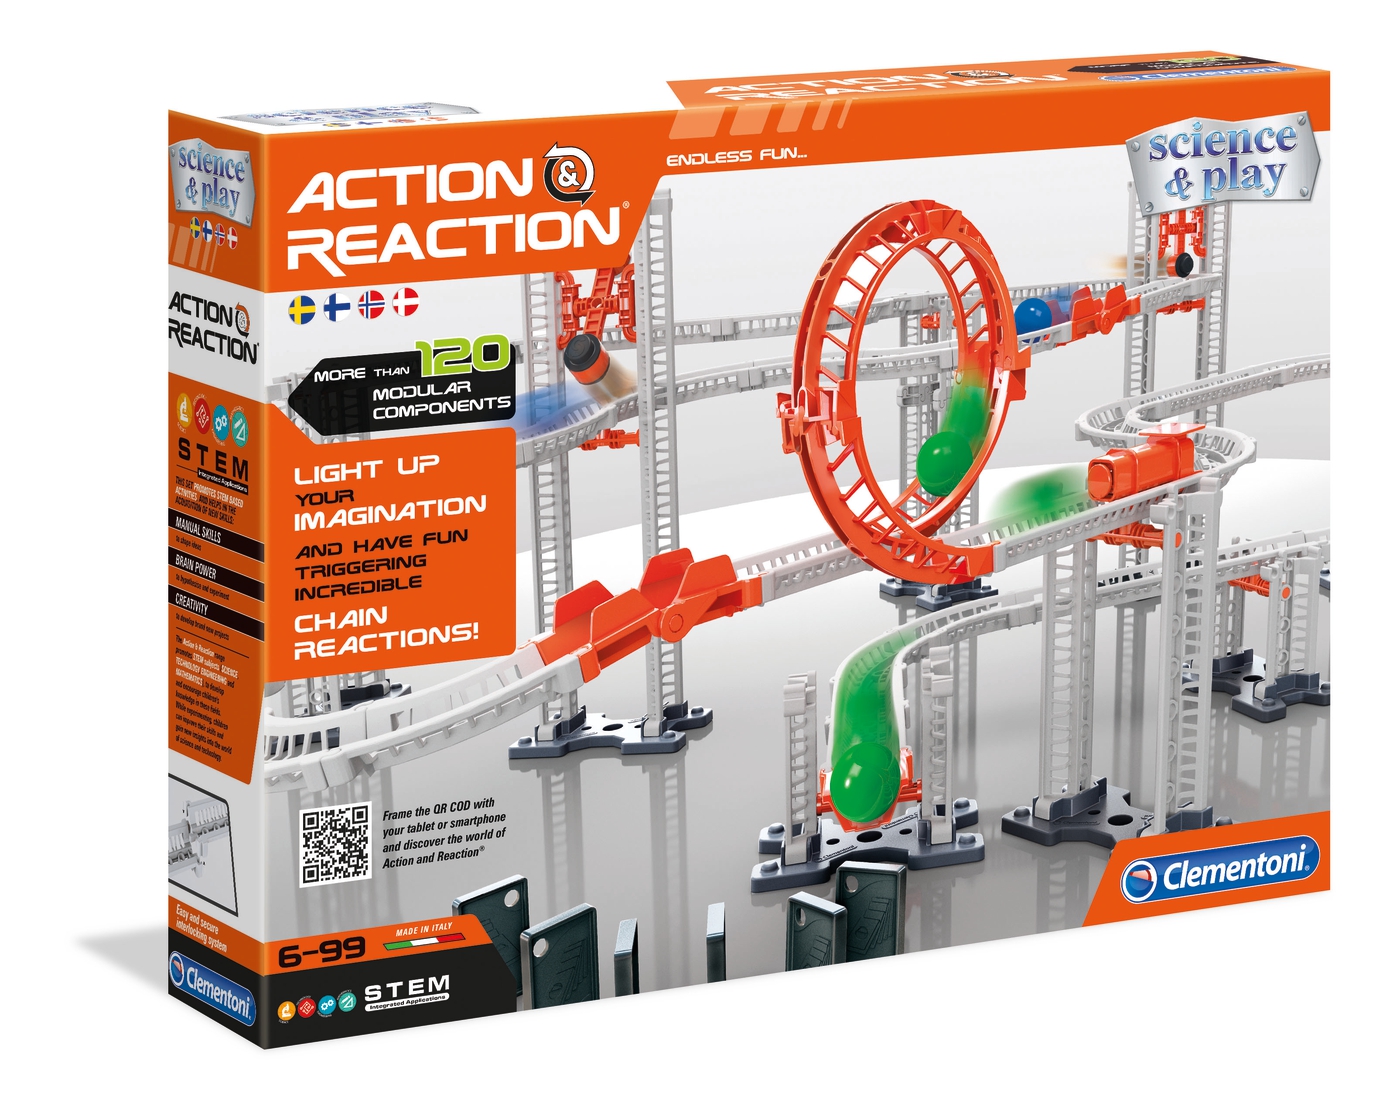 Clementoni 19216 Science Museum Action & Reaction Lifting System Toy for and 8 696563457902 